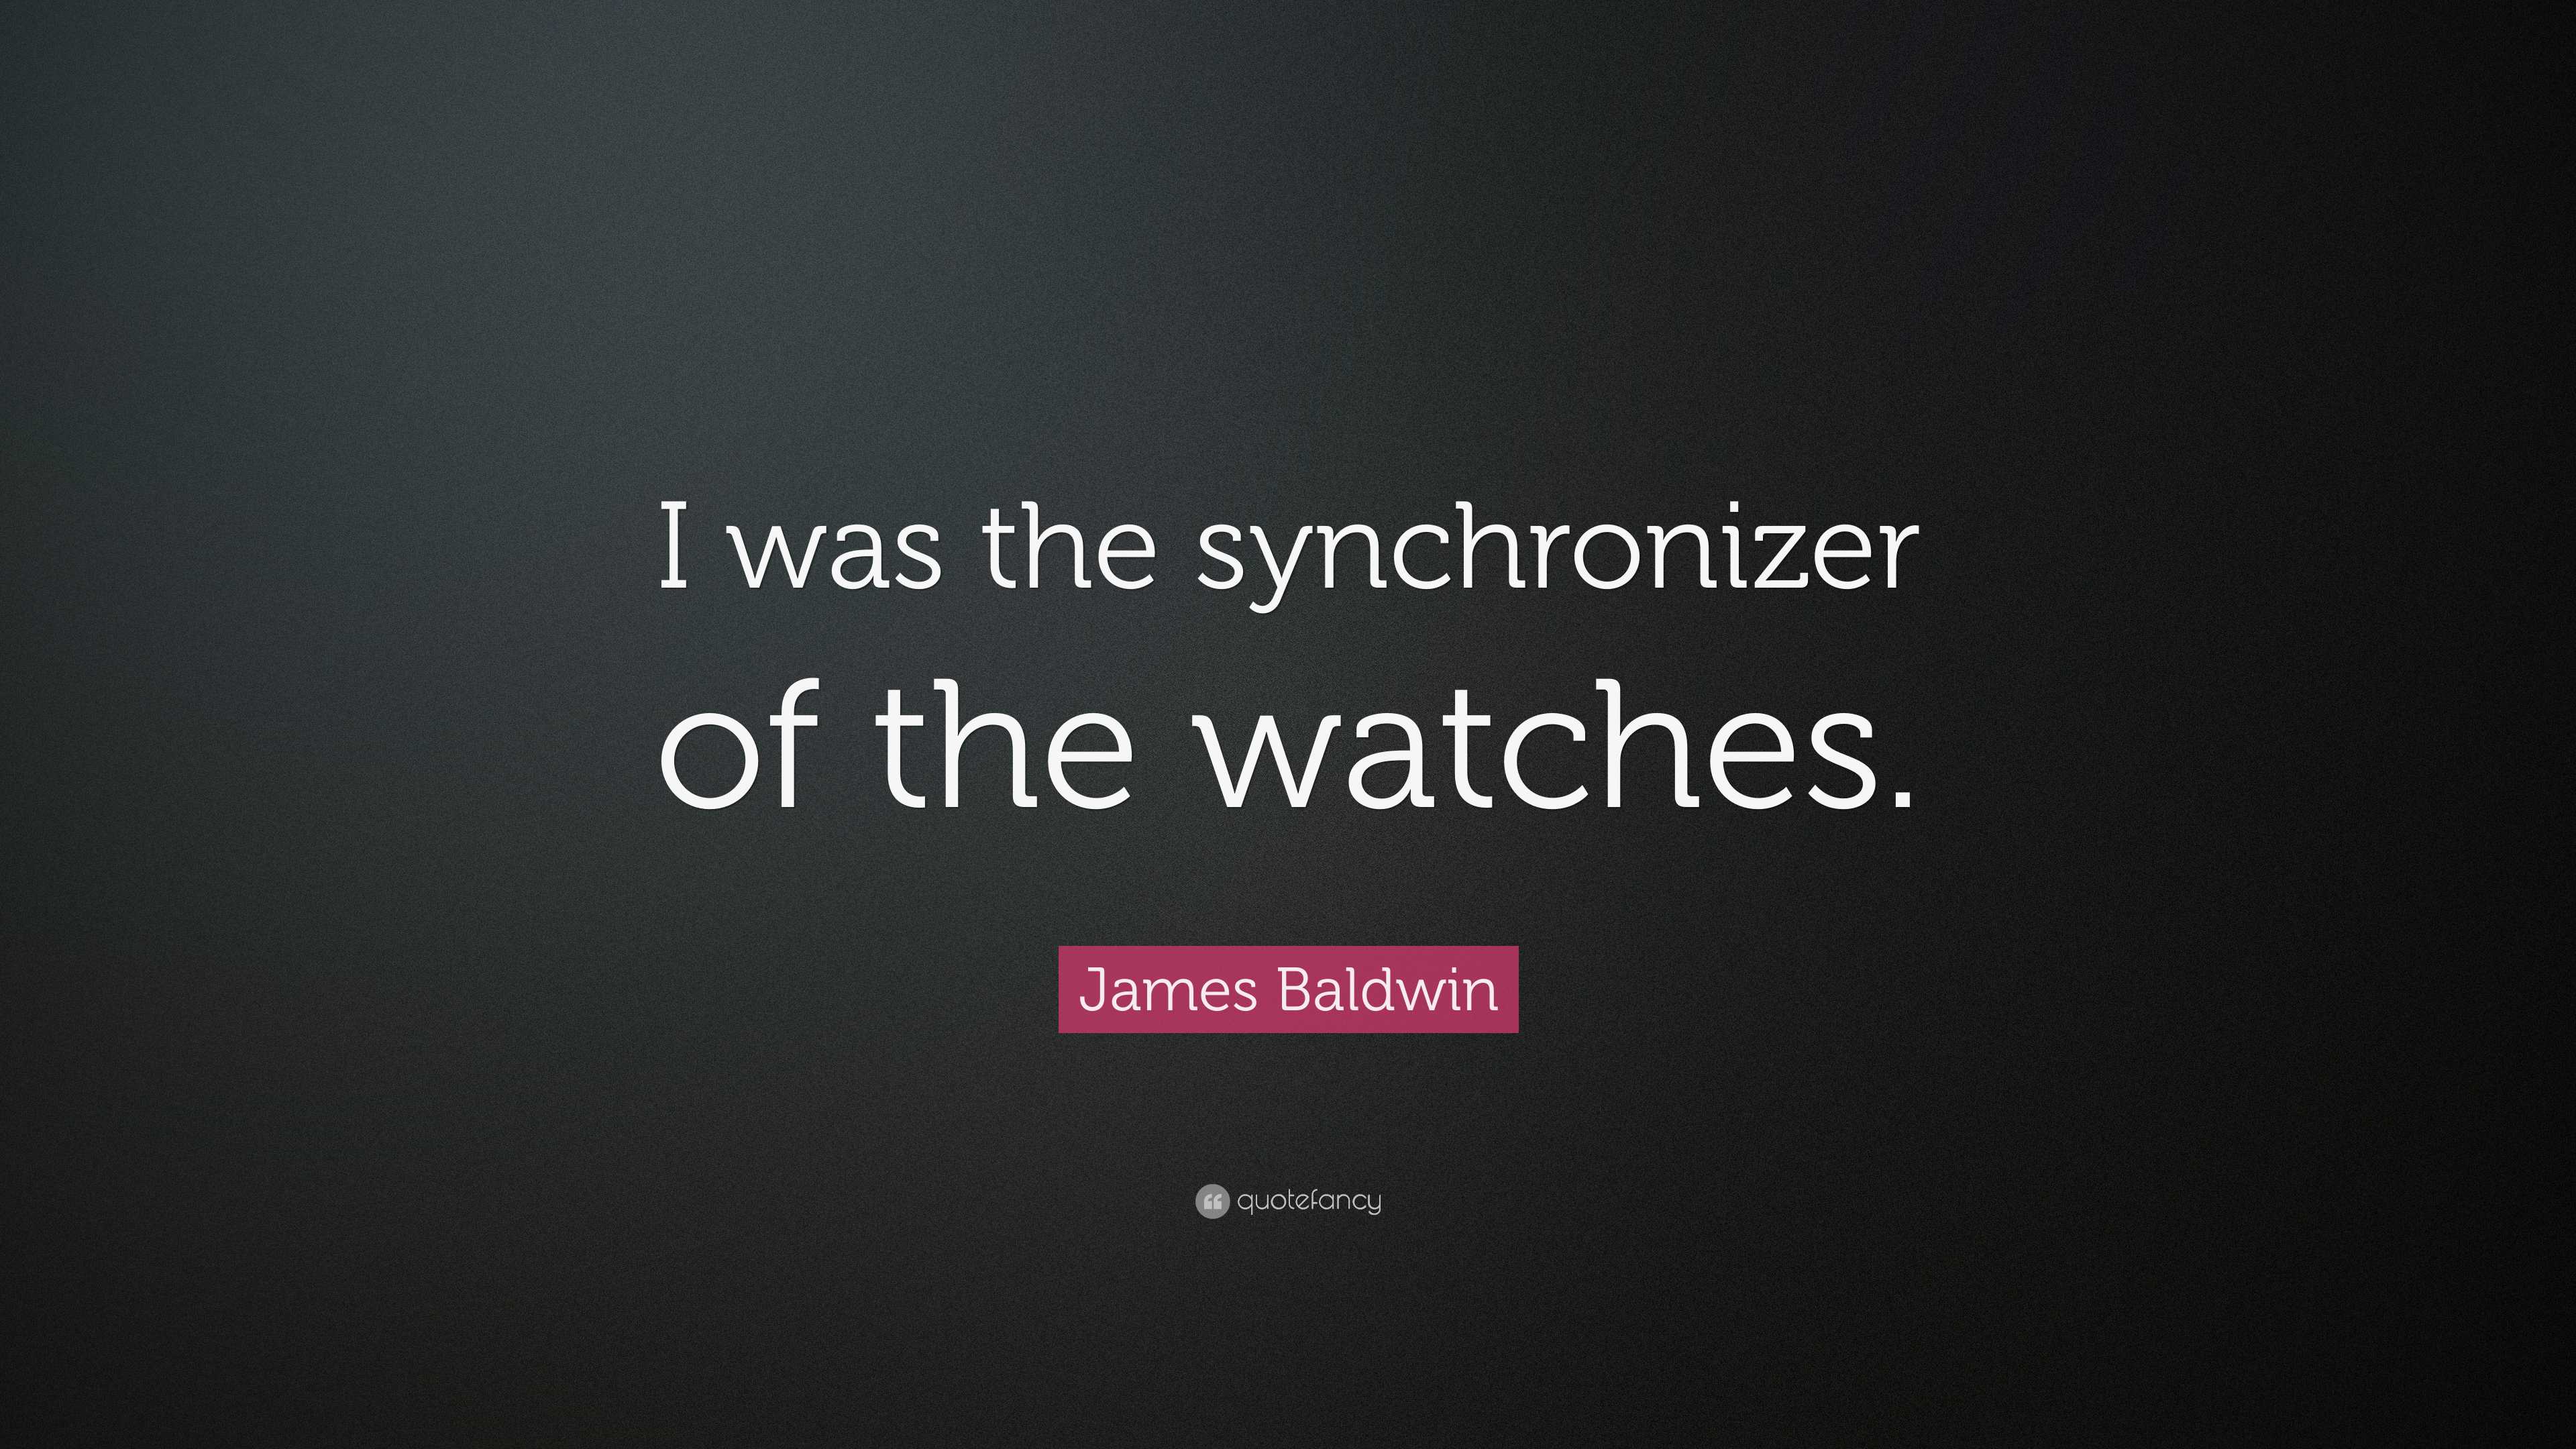 8118456 James Baldwin Quote I was the synchronizer of the watches